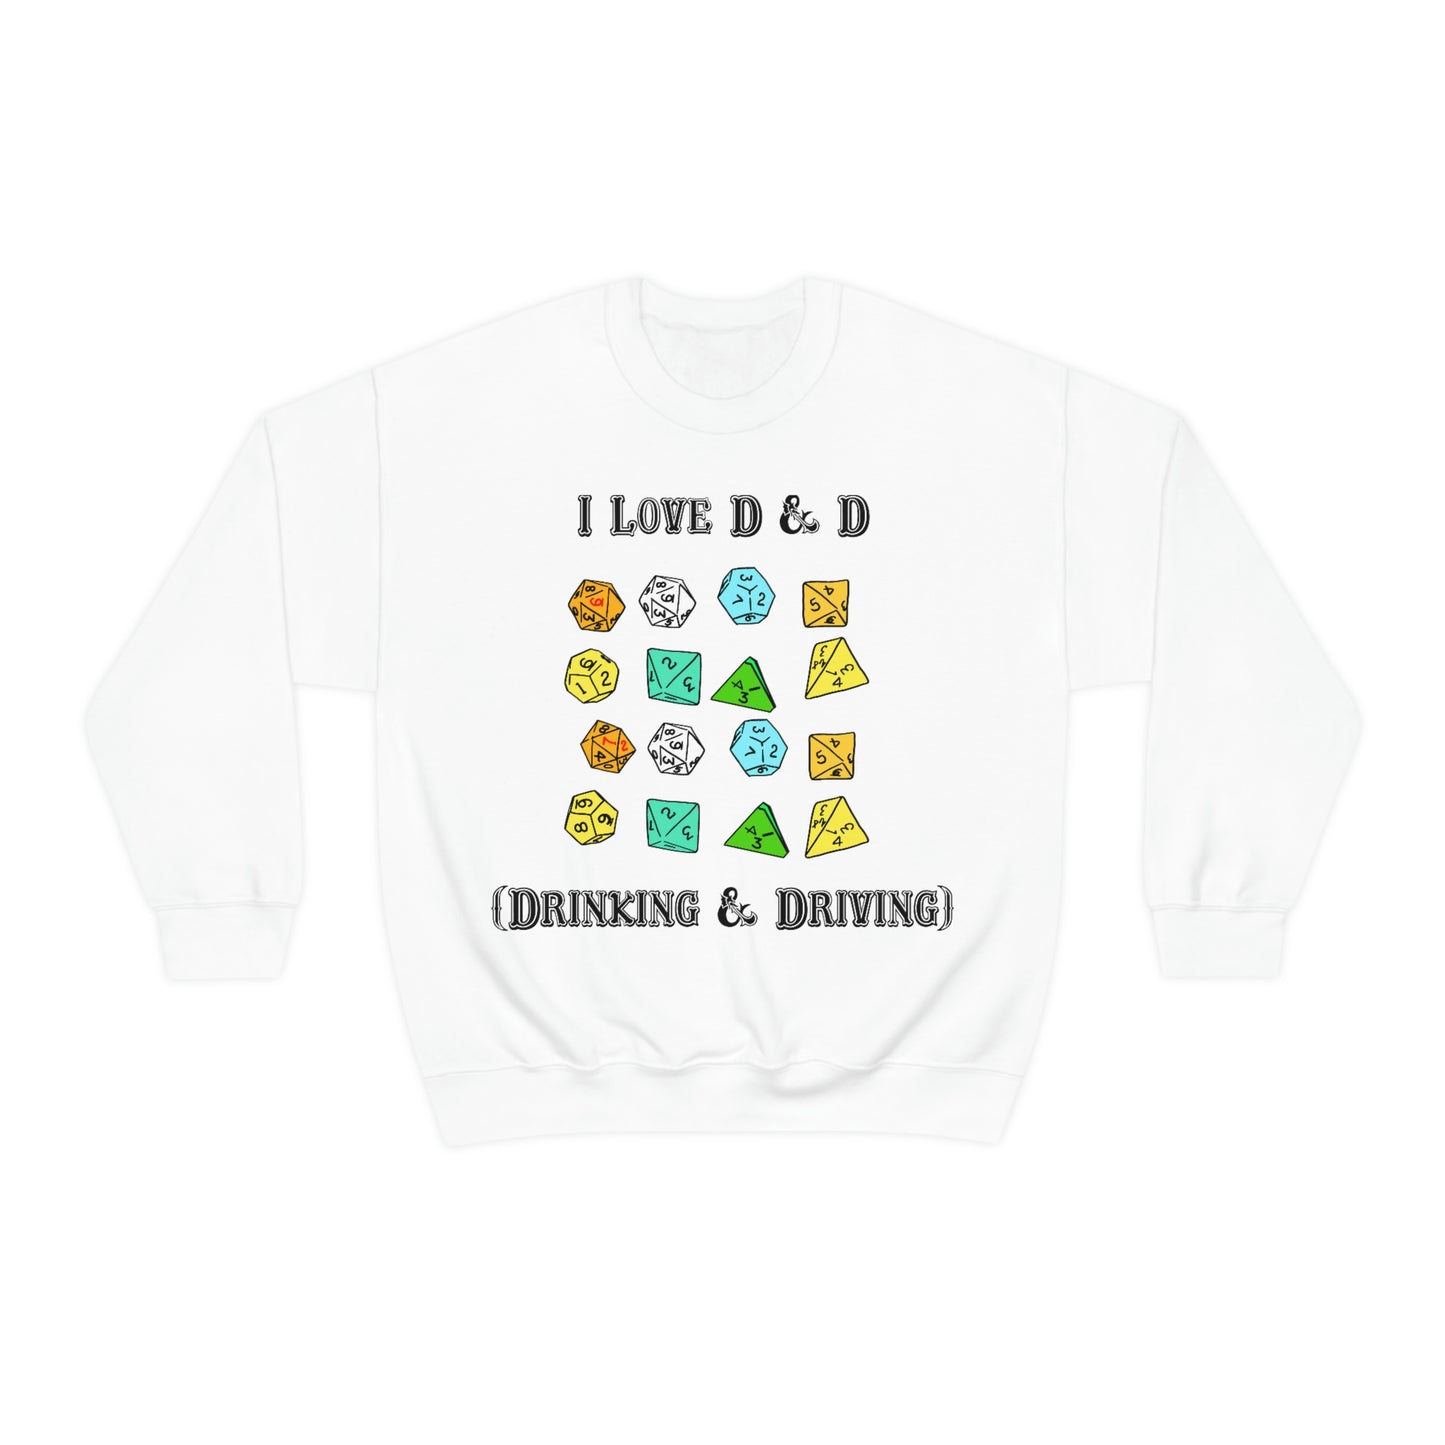 I Love D & D (Drinking and Driving) Crewneck.